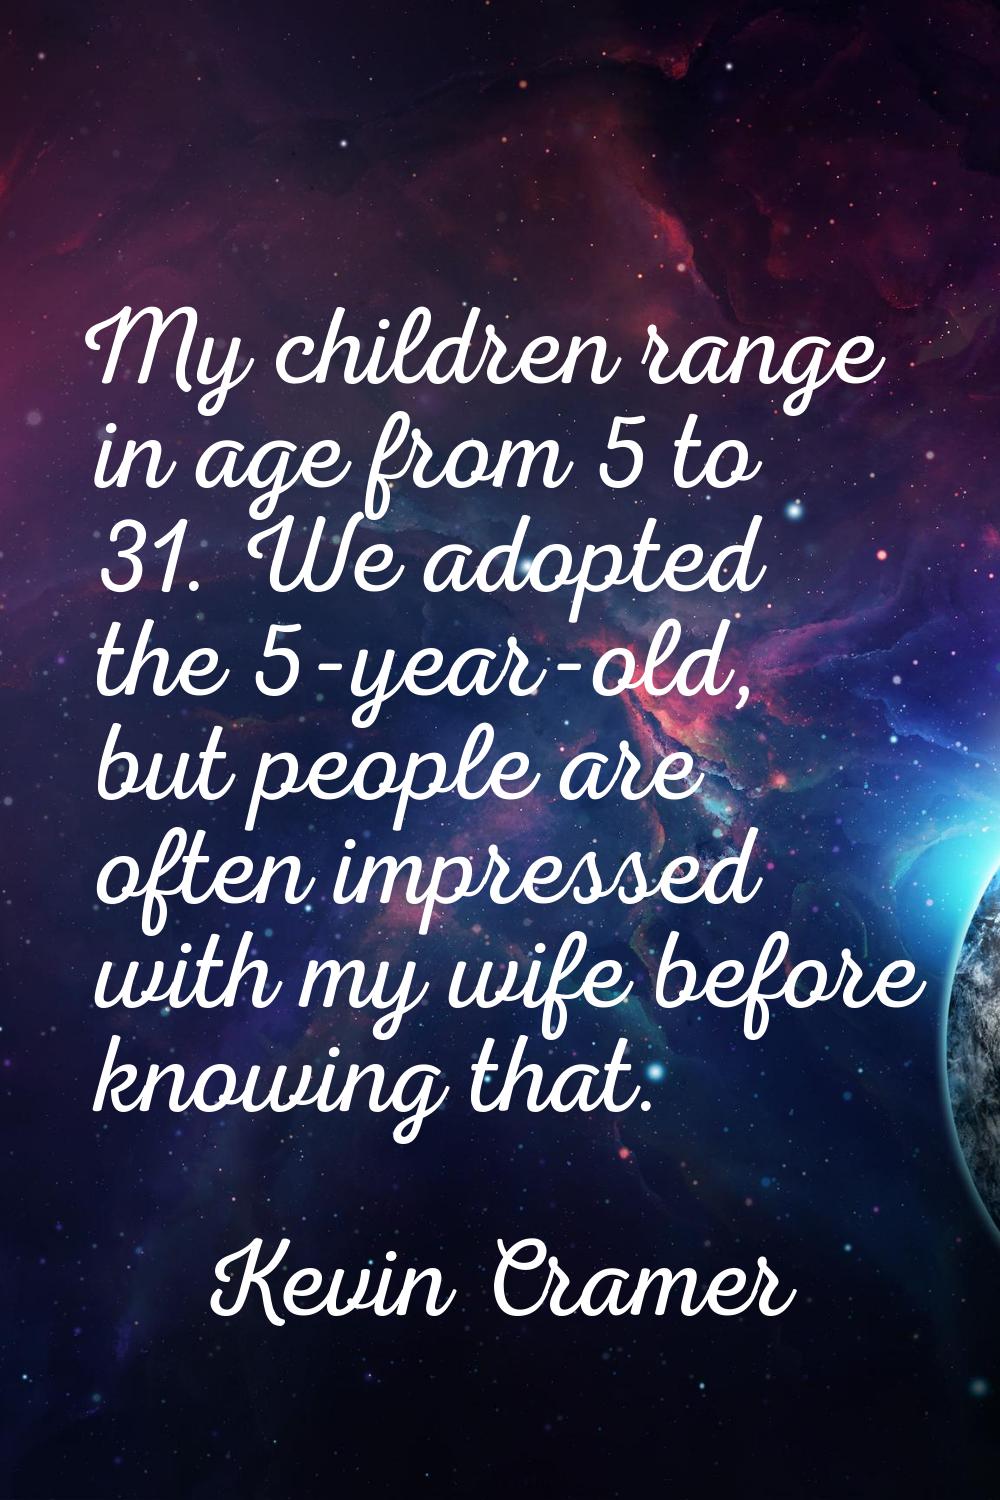 My children range in age from 5 to 31. We adopted the 5-year-old, but people are often impressed wi